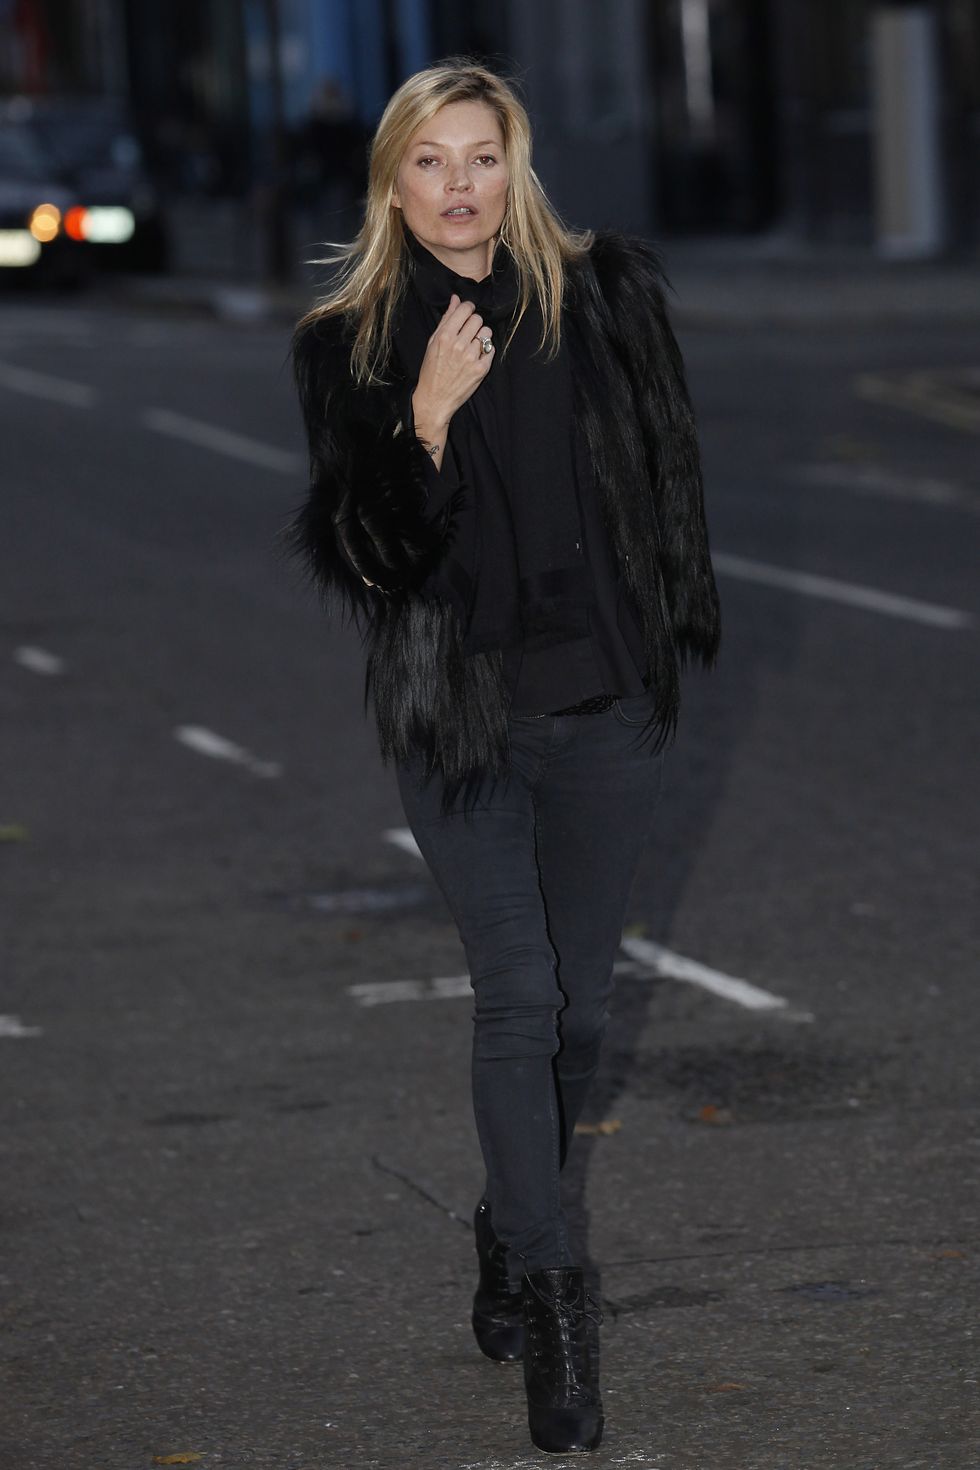 kate moss and jamie hince sighting in london november 24, 2011